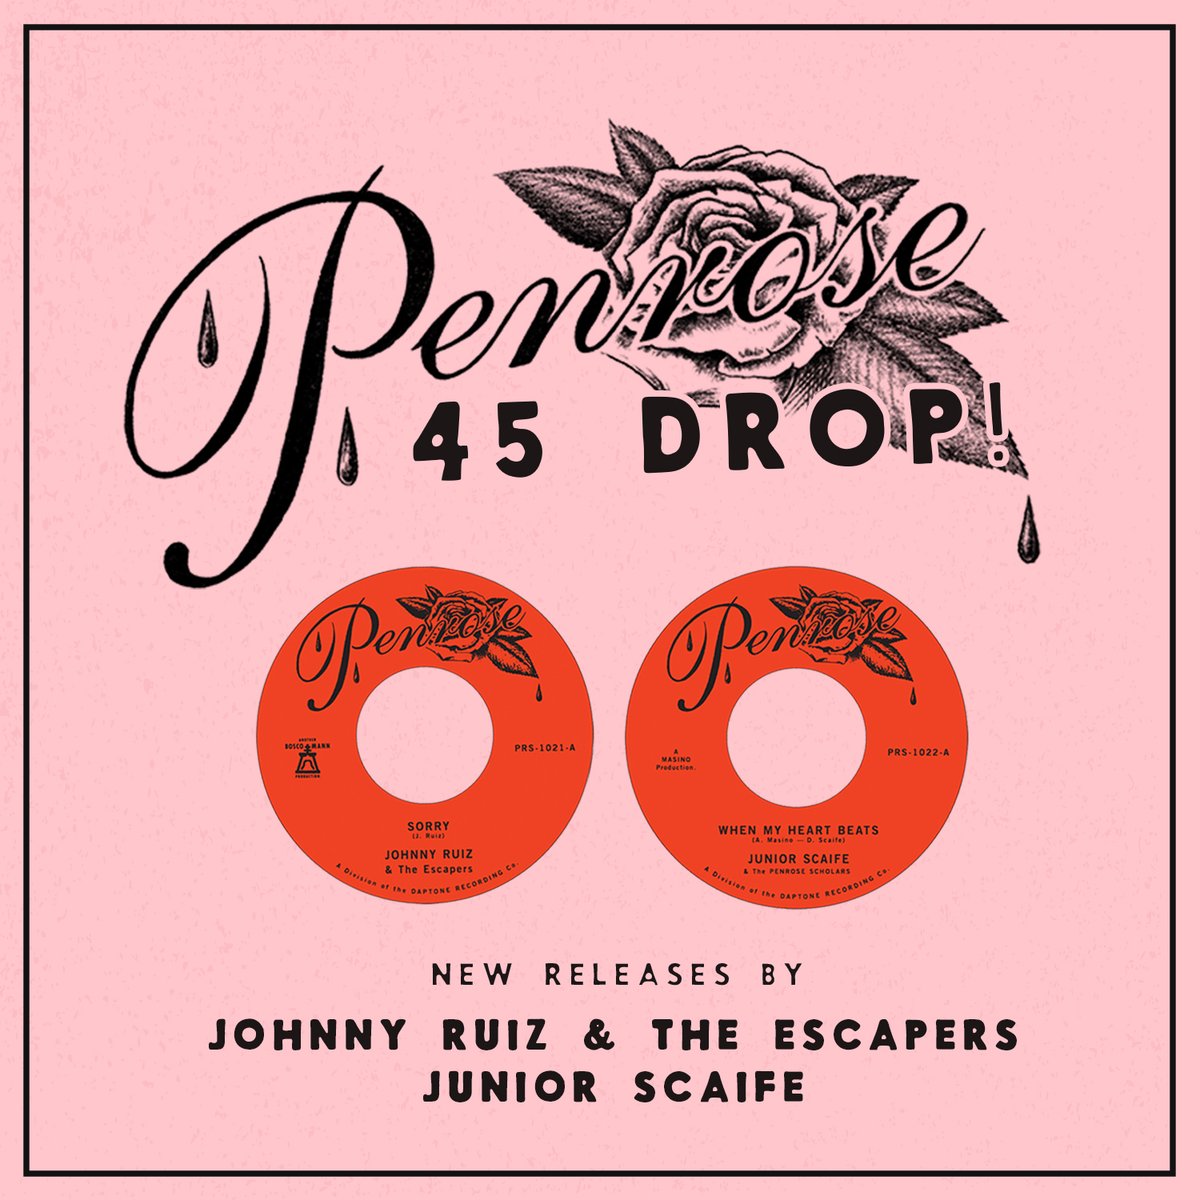 45 DROP • Today we introduce two new 45s available now for pre-order. Listen/Order: ♦️Johnny Ruiz & The Escapers - daptone.ffm.to/johnnyruiz.OTW ♦️Junior Scaife - daptone.ffm.to/juniorscaife.O…